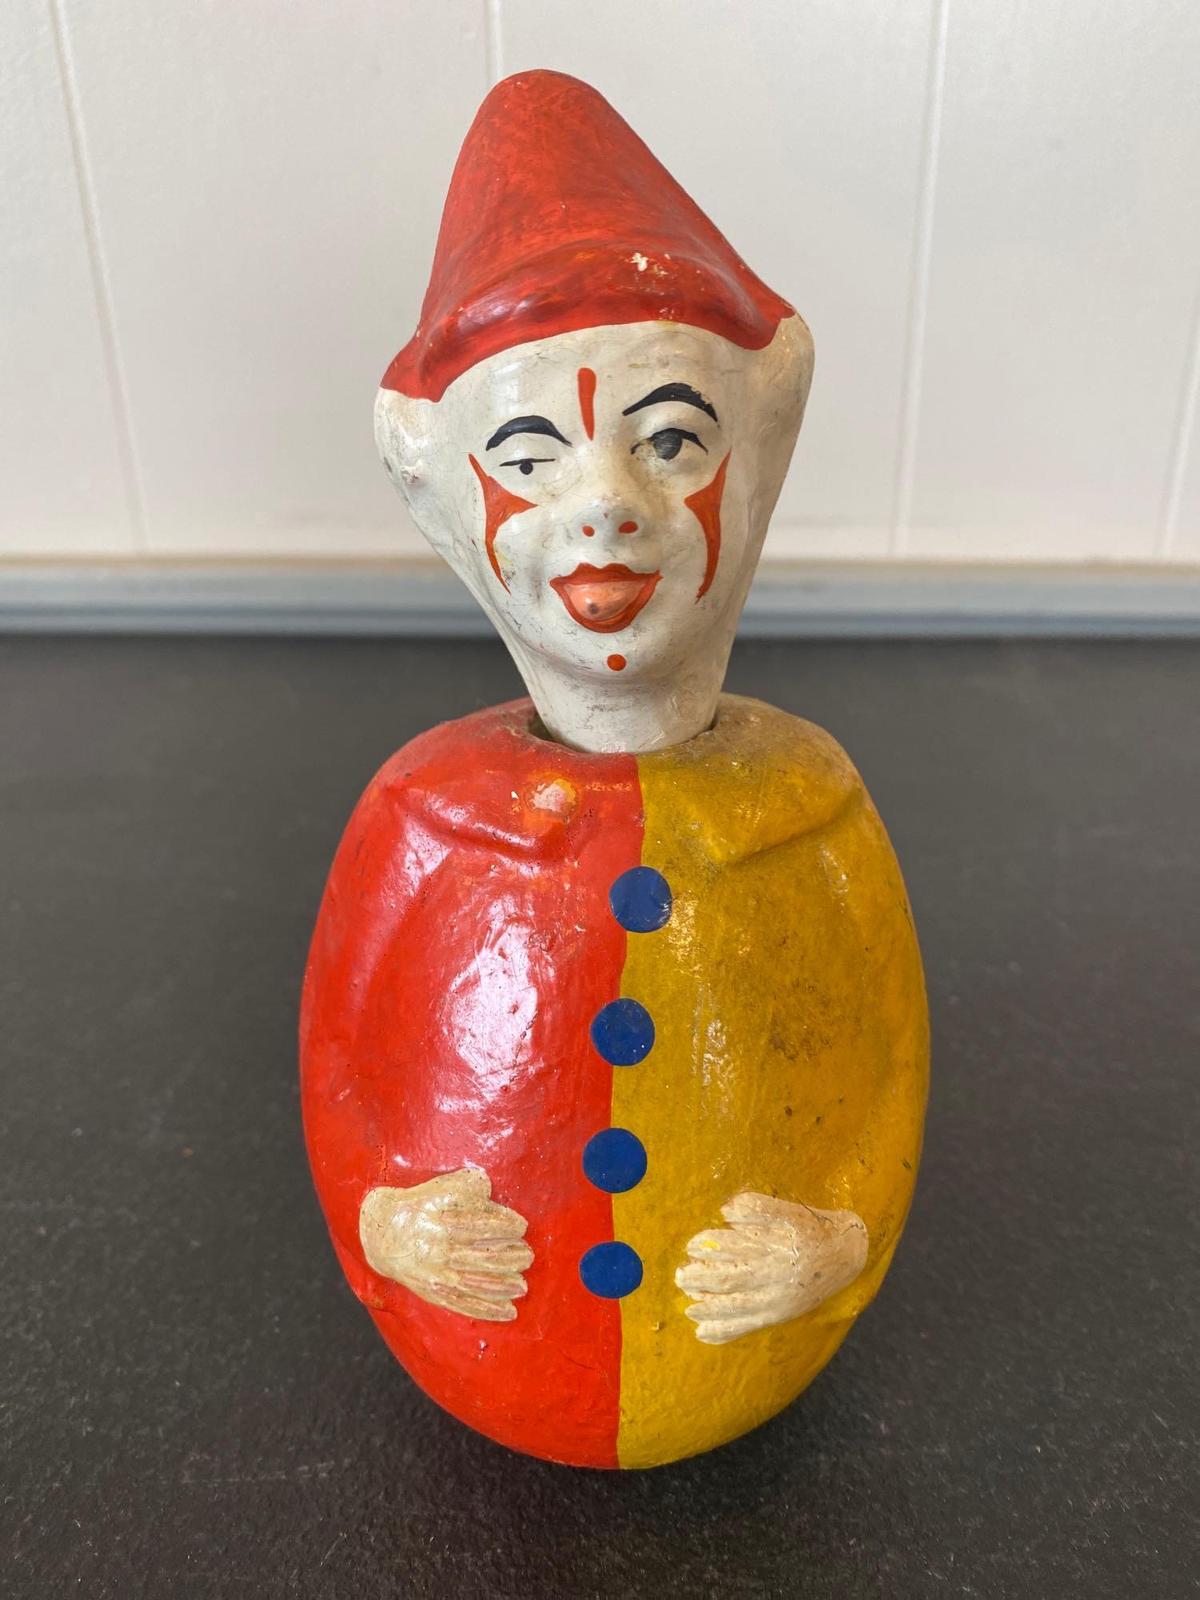 Hand painted composition clown, roly poly style, 7" tall.